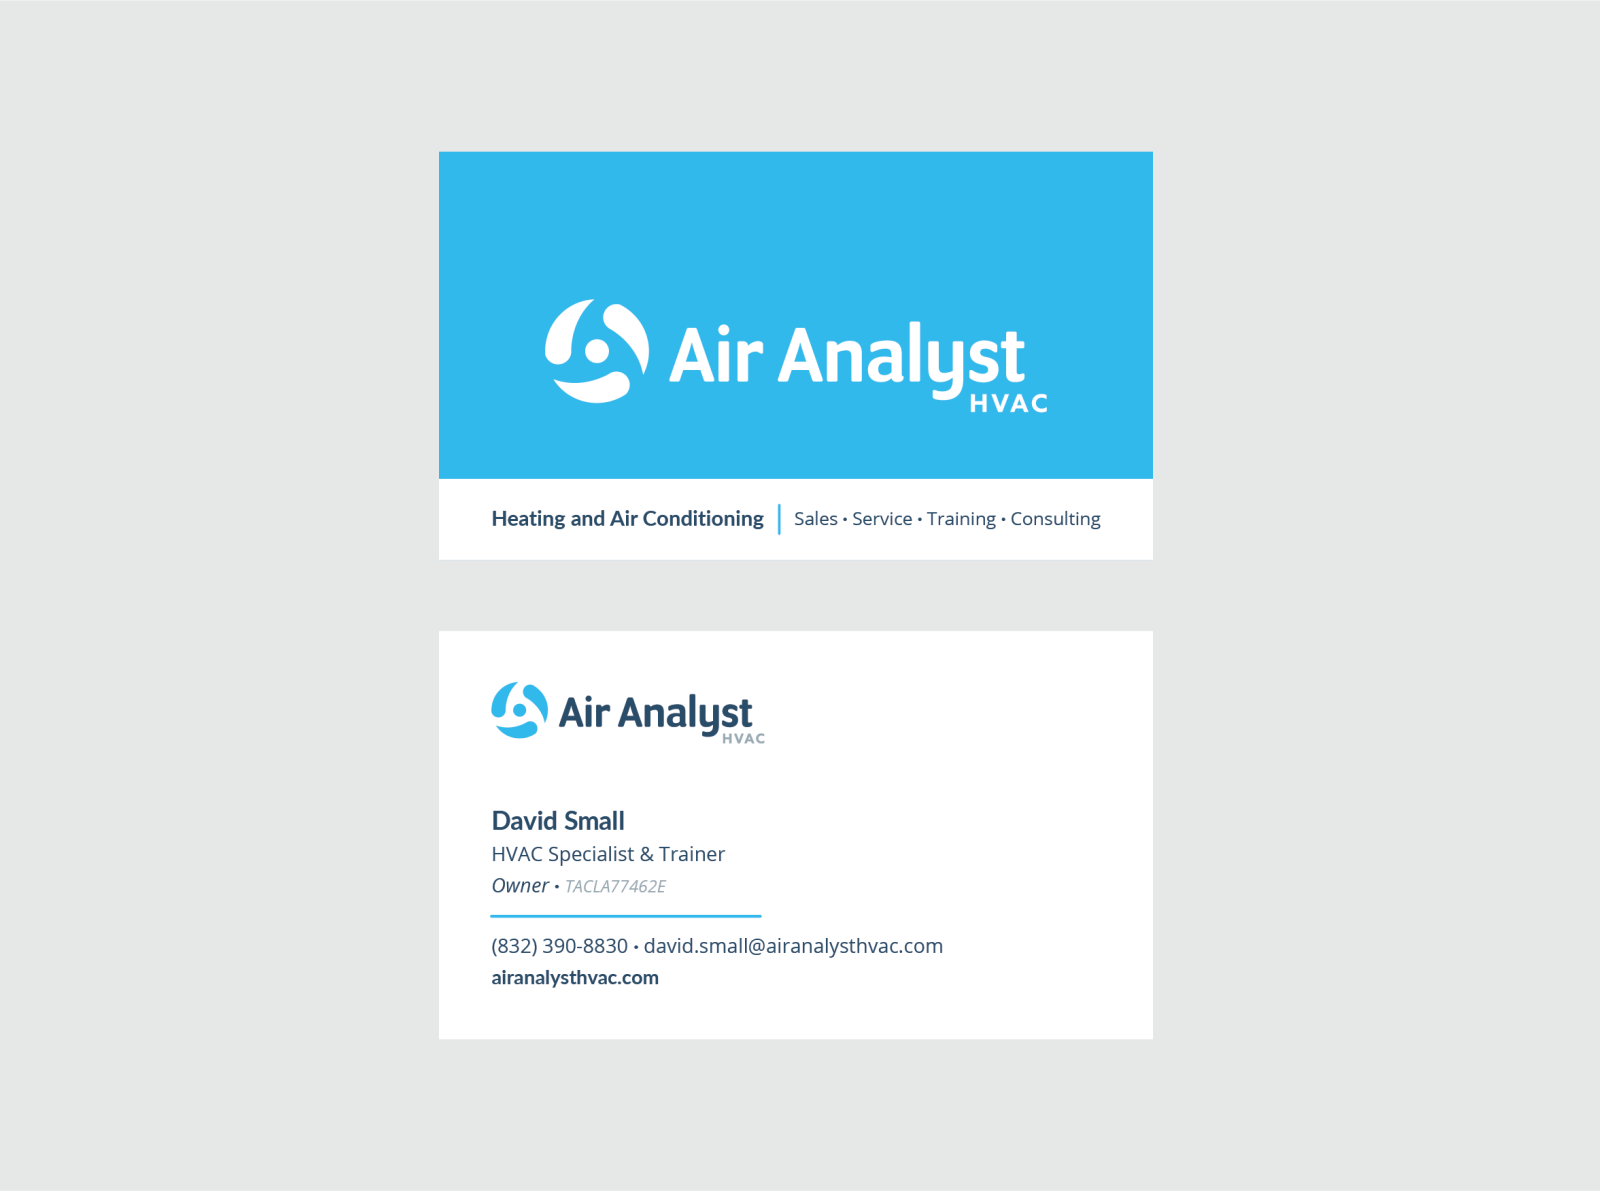 Air Analyst HVAC Business Cards by Jose Mendoza on Dribbble With Hvac Business Card Template